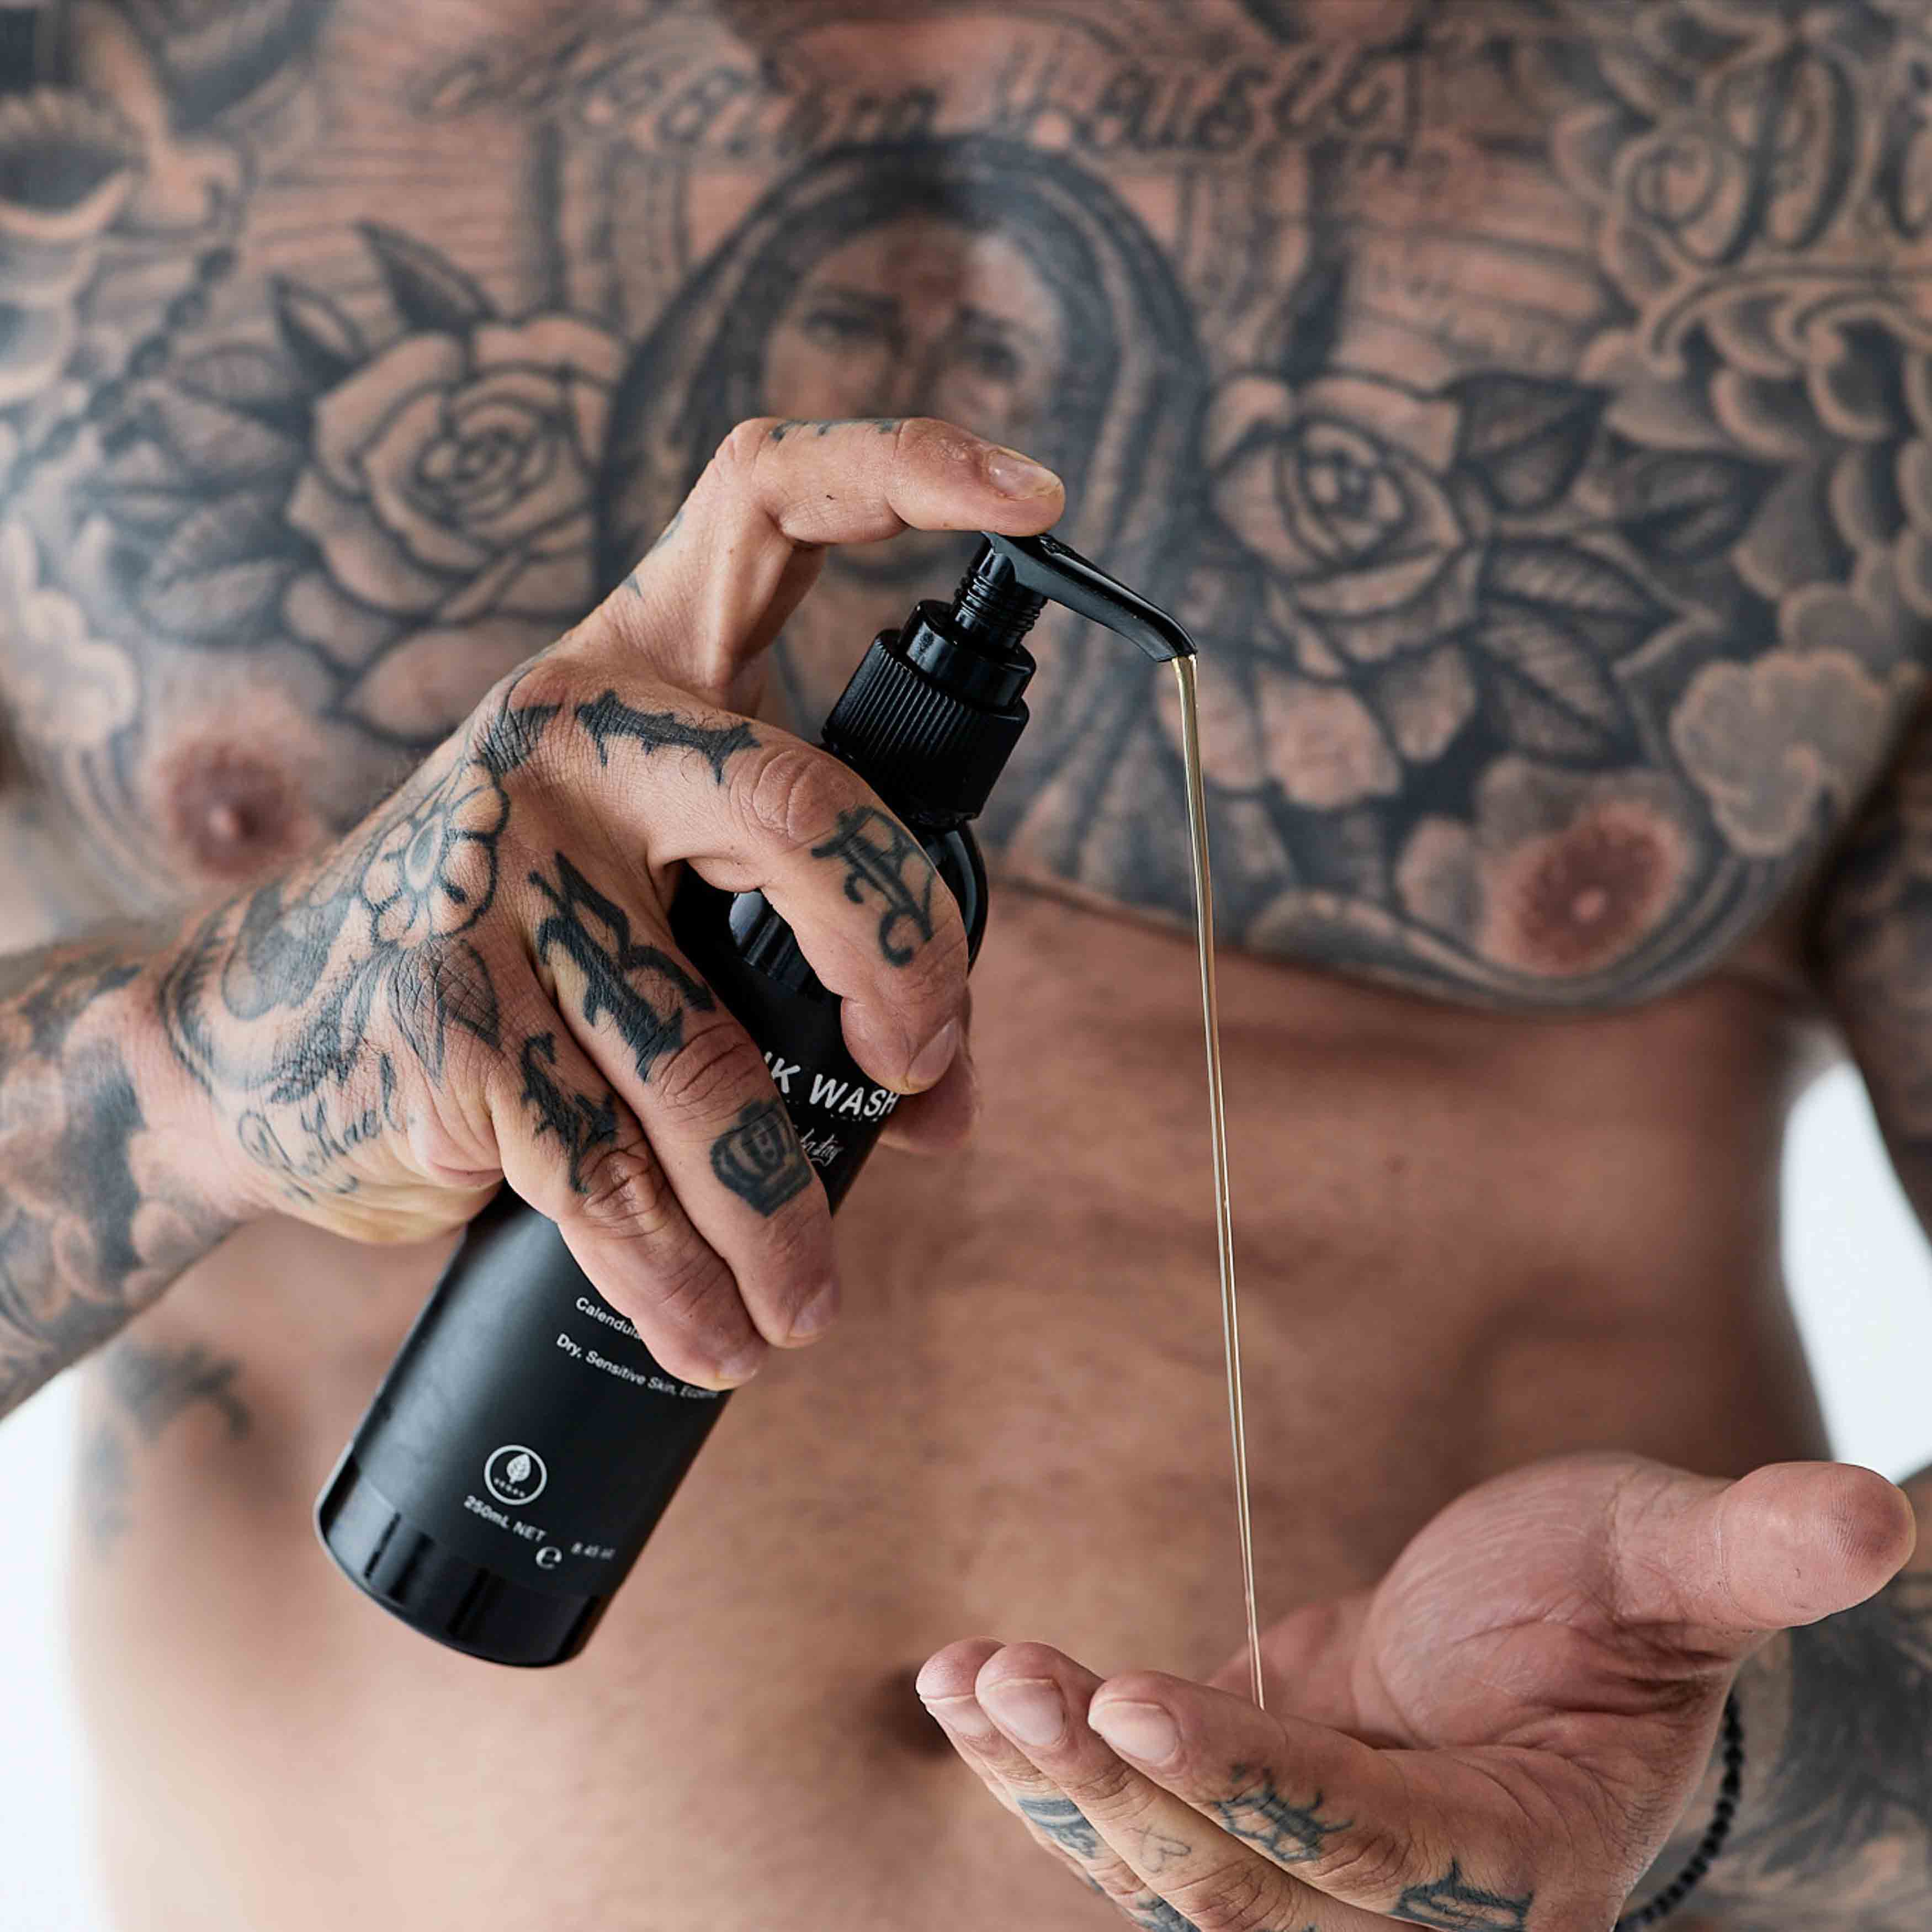 How to Fix an Over-Moisturised Tattoo